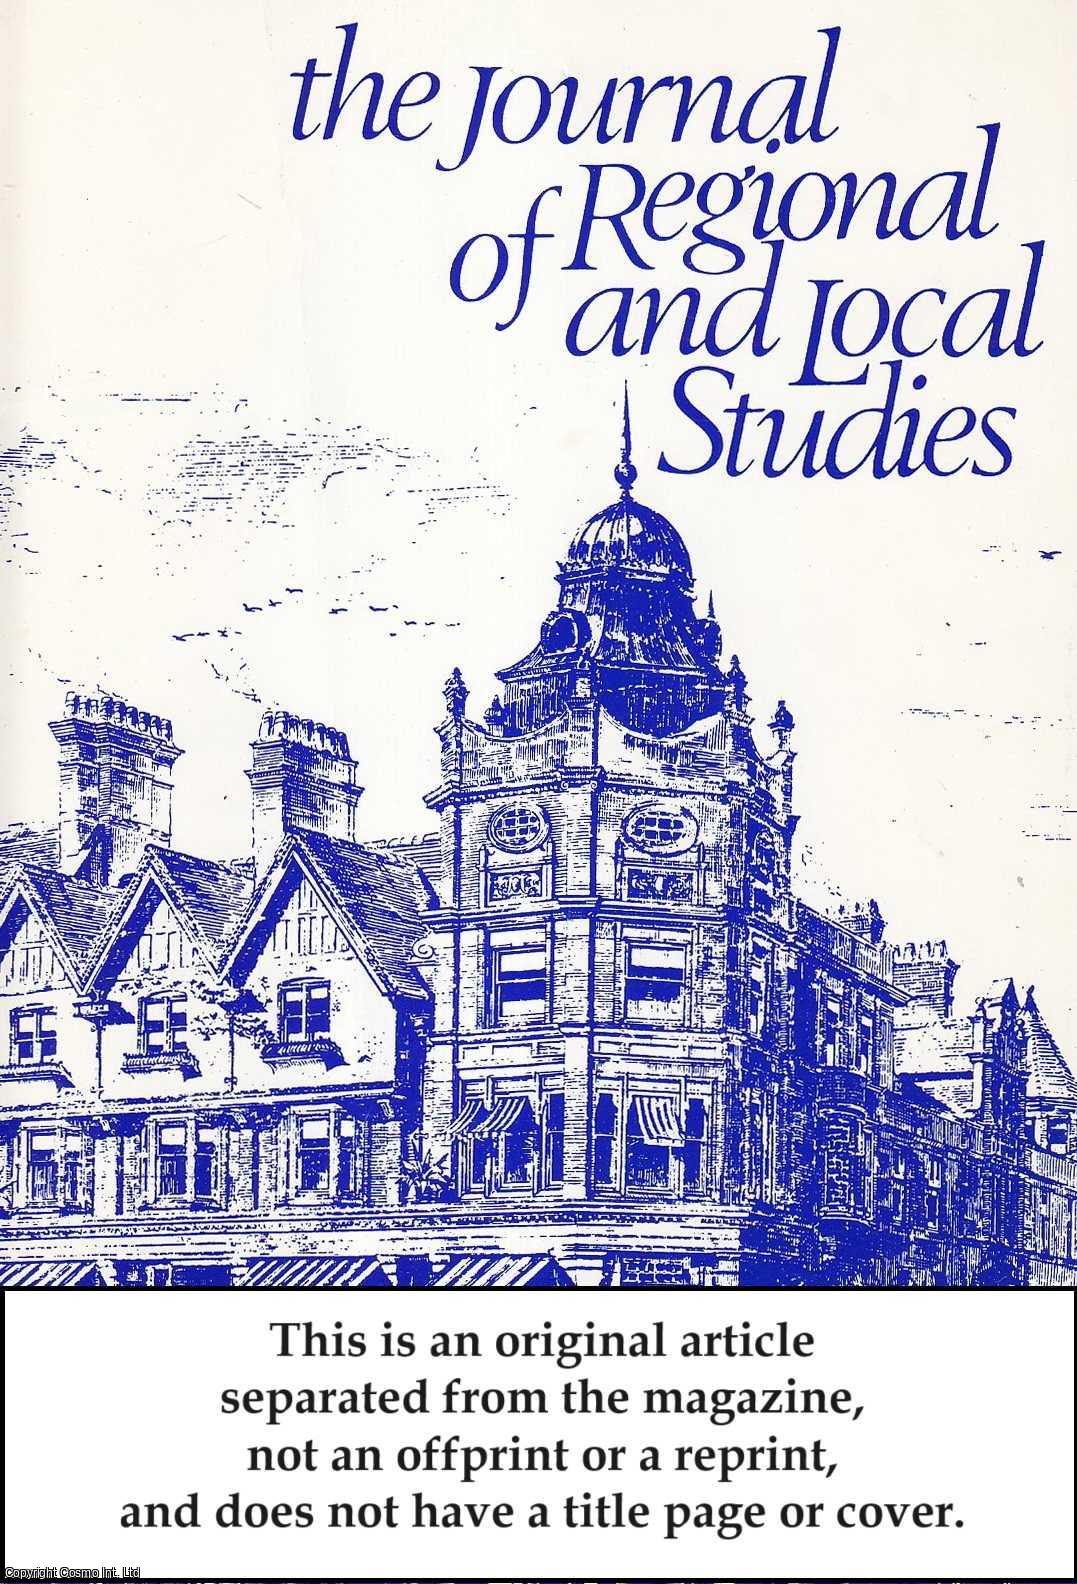 B. Stapleton - English Local History - An Educational Exercise. An original article from Journal of Regional & Local Studies, 1984.